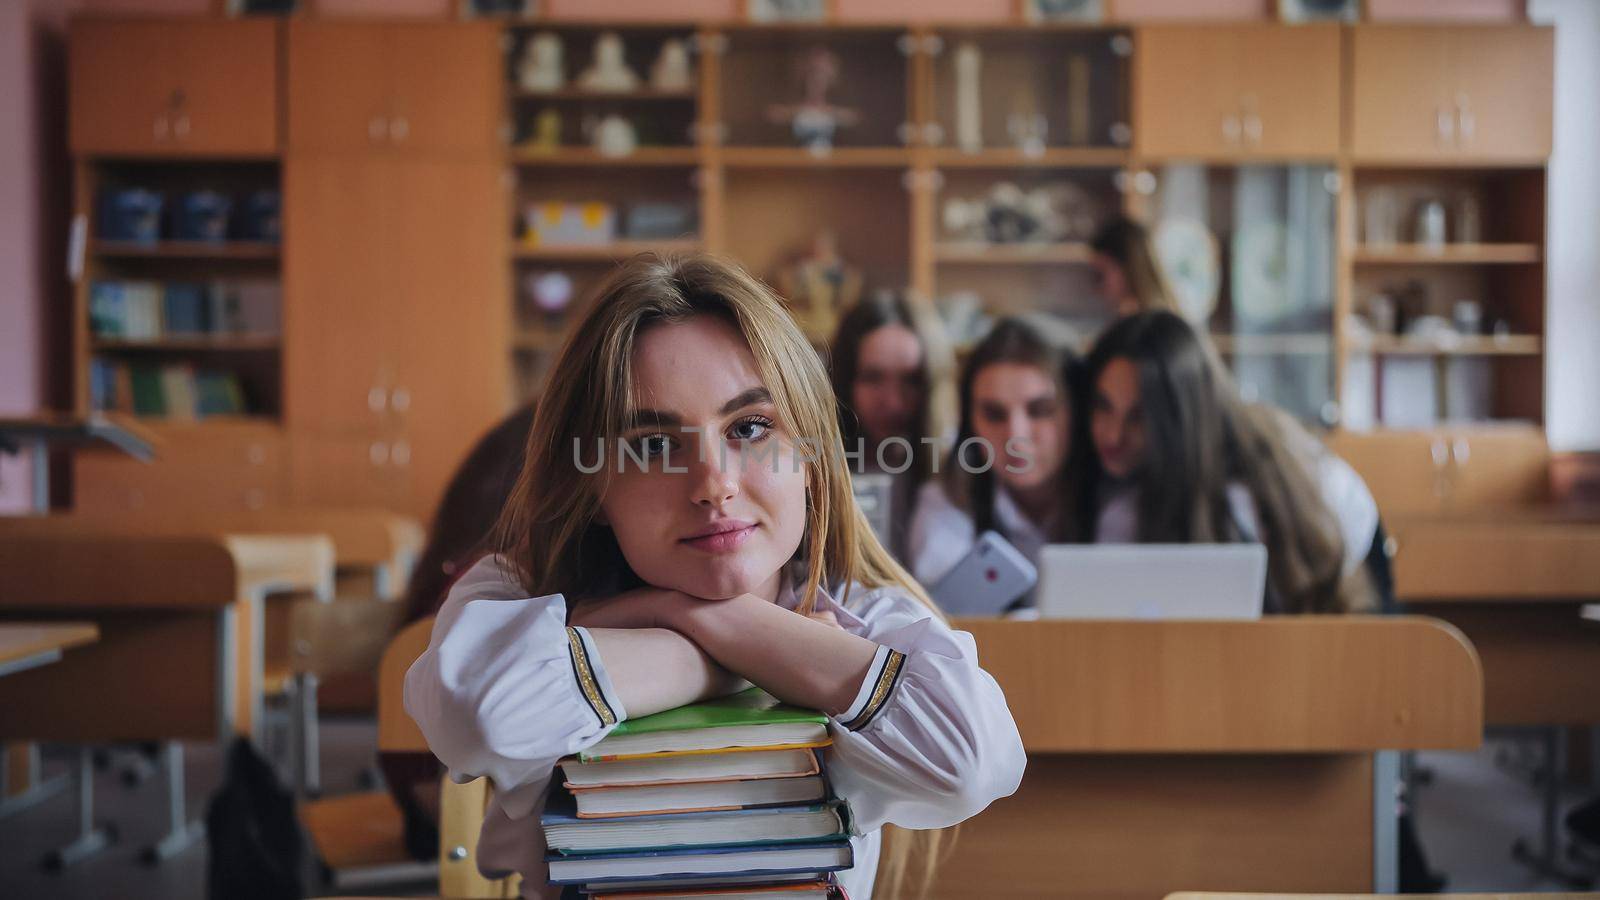 A student poses with textbooks at her desk in her class